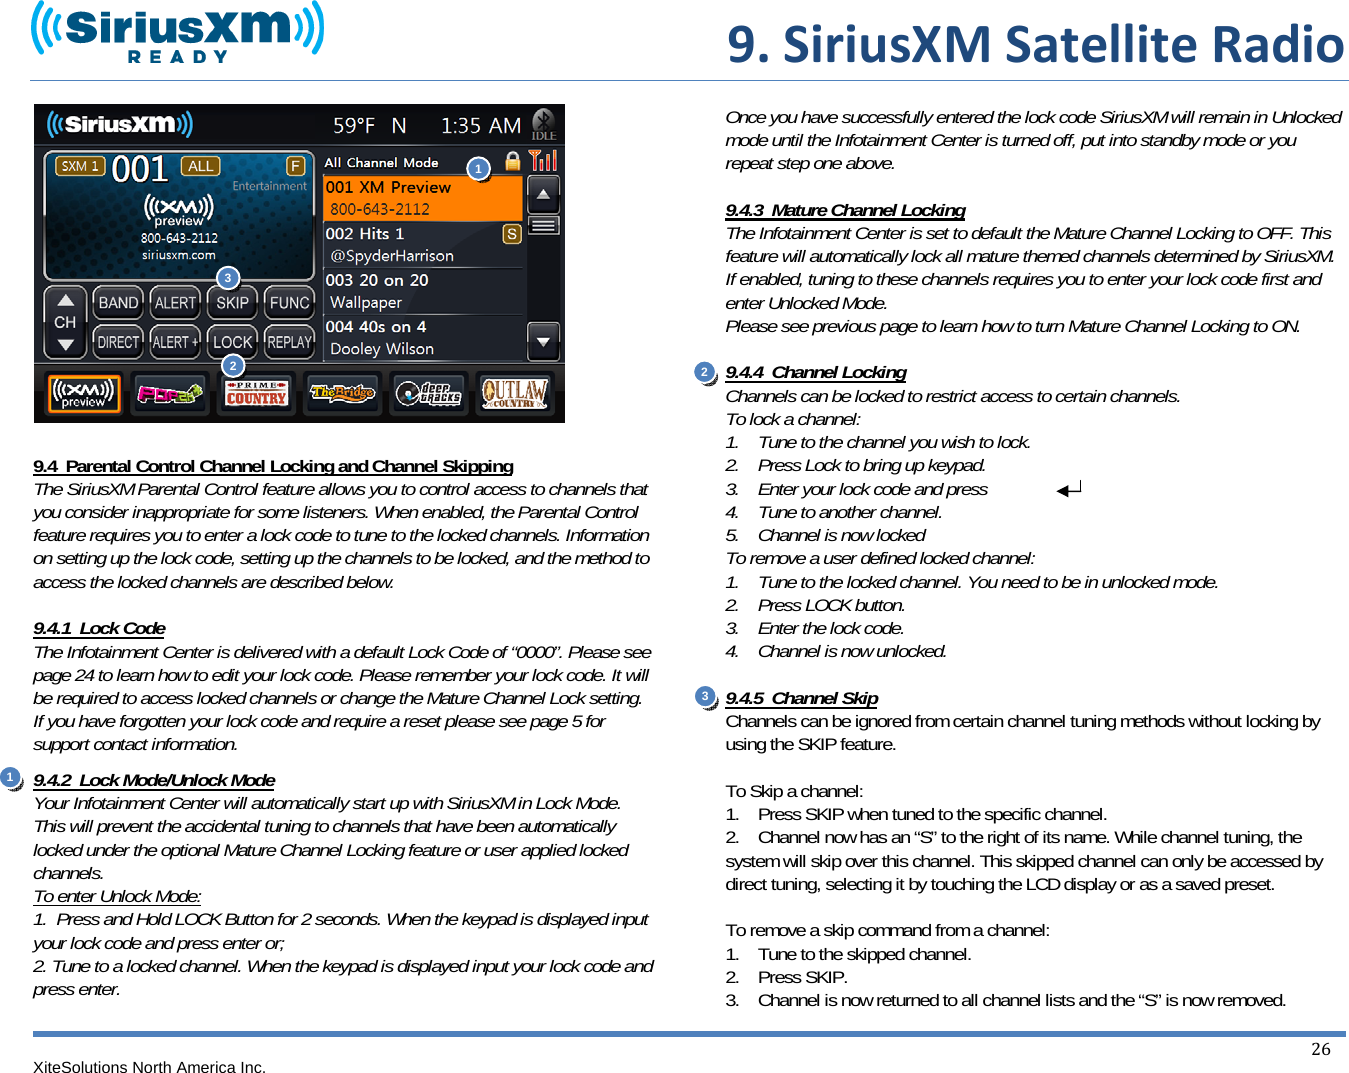  9.SiriusXMSatelliteRadioXiteSolutions North America Inc.  26                9.4  Parental Control Channel Locking and Channel Skipping The SiriusXM Parental Control feature allows you to control access to channels that you consider inappropriate for some listeners. When enabled, the Parental Control feature requires you to enter a lock code to tune to the locked channels. Information on setting up the lock code, setting up the channels to be locked, and the method to access the locked channels are described below.  9.4.1  Lock Code The Infotainment Center is delivered with a default Lock Code of “0000”. Please see page 24 to learn how to edit your lock code. Please remember your lock code. It will be required to access locked channels or change the Mature Channel Lock setting. If you have forgotten your lock code and require a reset please see page 5 for support contact information. 9.4.2  Lock Mode/Unlock Mode Your Infotainment Center will automatically start up with SiriusXM in Lock Mode. This will prevent the accidental tuning to channels that have been automatically locked under the optional Mature Channel Locking feature or user applied locked channels. To enter Unlock Mode: 1.  Press and Hold LOCK Button for 2 seconds. When the keypad is displayed input your lock code and press enter or; 2. Tune to a locked channel. When the keypad is displayed input your lock code and press enter.  Once you have successfully entered the lock code SiriusXM will remain in Unlocked mode until the Infotainment Center is turned off, put into standby mode or you repeat step one above.  9.4.3  Mature Channel Locking The Infotainment Center is set to default the Mature Channel Locking to OFF. This feature will automatically lock all mature themed channels determined by SiriusXM. If enabled, tuning to these channels requires you to enter your lock code first and enter Unlocked Mode. Please see previous page to learn how to turn Mature Channel Locking to ON.   9.4.4  Channel Locking Channels can be locked to restrict access to certain channels. To lock a channel: 1.    Tune to the channel you wish to lock. 2.    Press Lock to bring up keypad. 3.    Enter your lock code and press 4.    Tune to another channel. 5.    Channel is now locked To remove a user defined locked channel: 1.    Tune to the locked channel. You need to be in unlocked mode.  2.    Press LOCK button. 3.    Enter the lock code. 4.    Channel is now unlocked.  9.4.5  Channel Skip Channels can be ignored from certain channel tuning methods without locking by using the SKIP feature.  To Skip a channel: 1.    Press SKIP when tuned to the specific channel. 2.    Channel now has an “S” to the right of its name. While channel tuning, the system will skip over this channel. This skipped channel can only be accessed by direct tuning, selecting it by touching the LCD display or as a saved preset.  To remove a skip command from a channel: 1.    Tune to the skipped channel. 2.    Press SKIP. 3.    Channel is now returned to all channel lists and the “S” is now removed.11 2  23 3